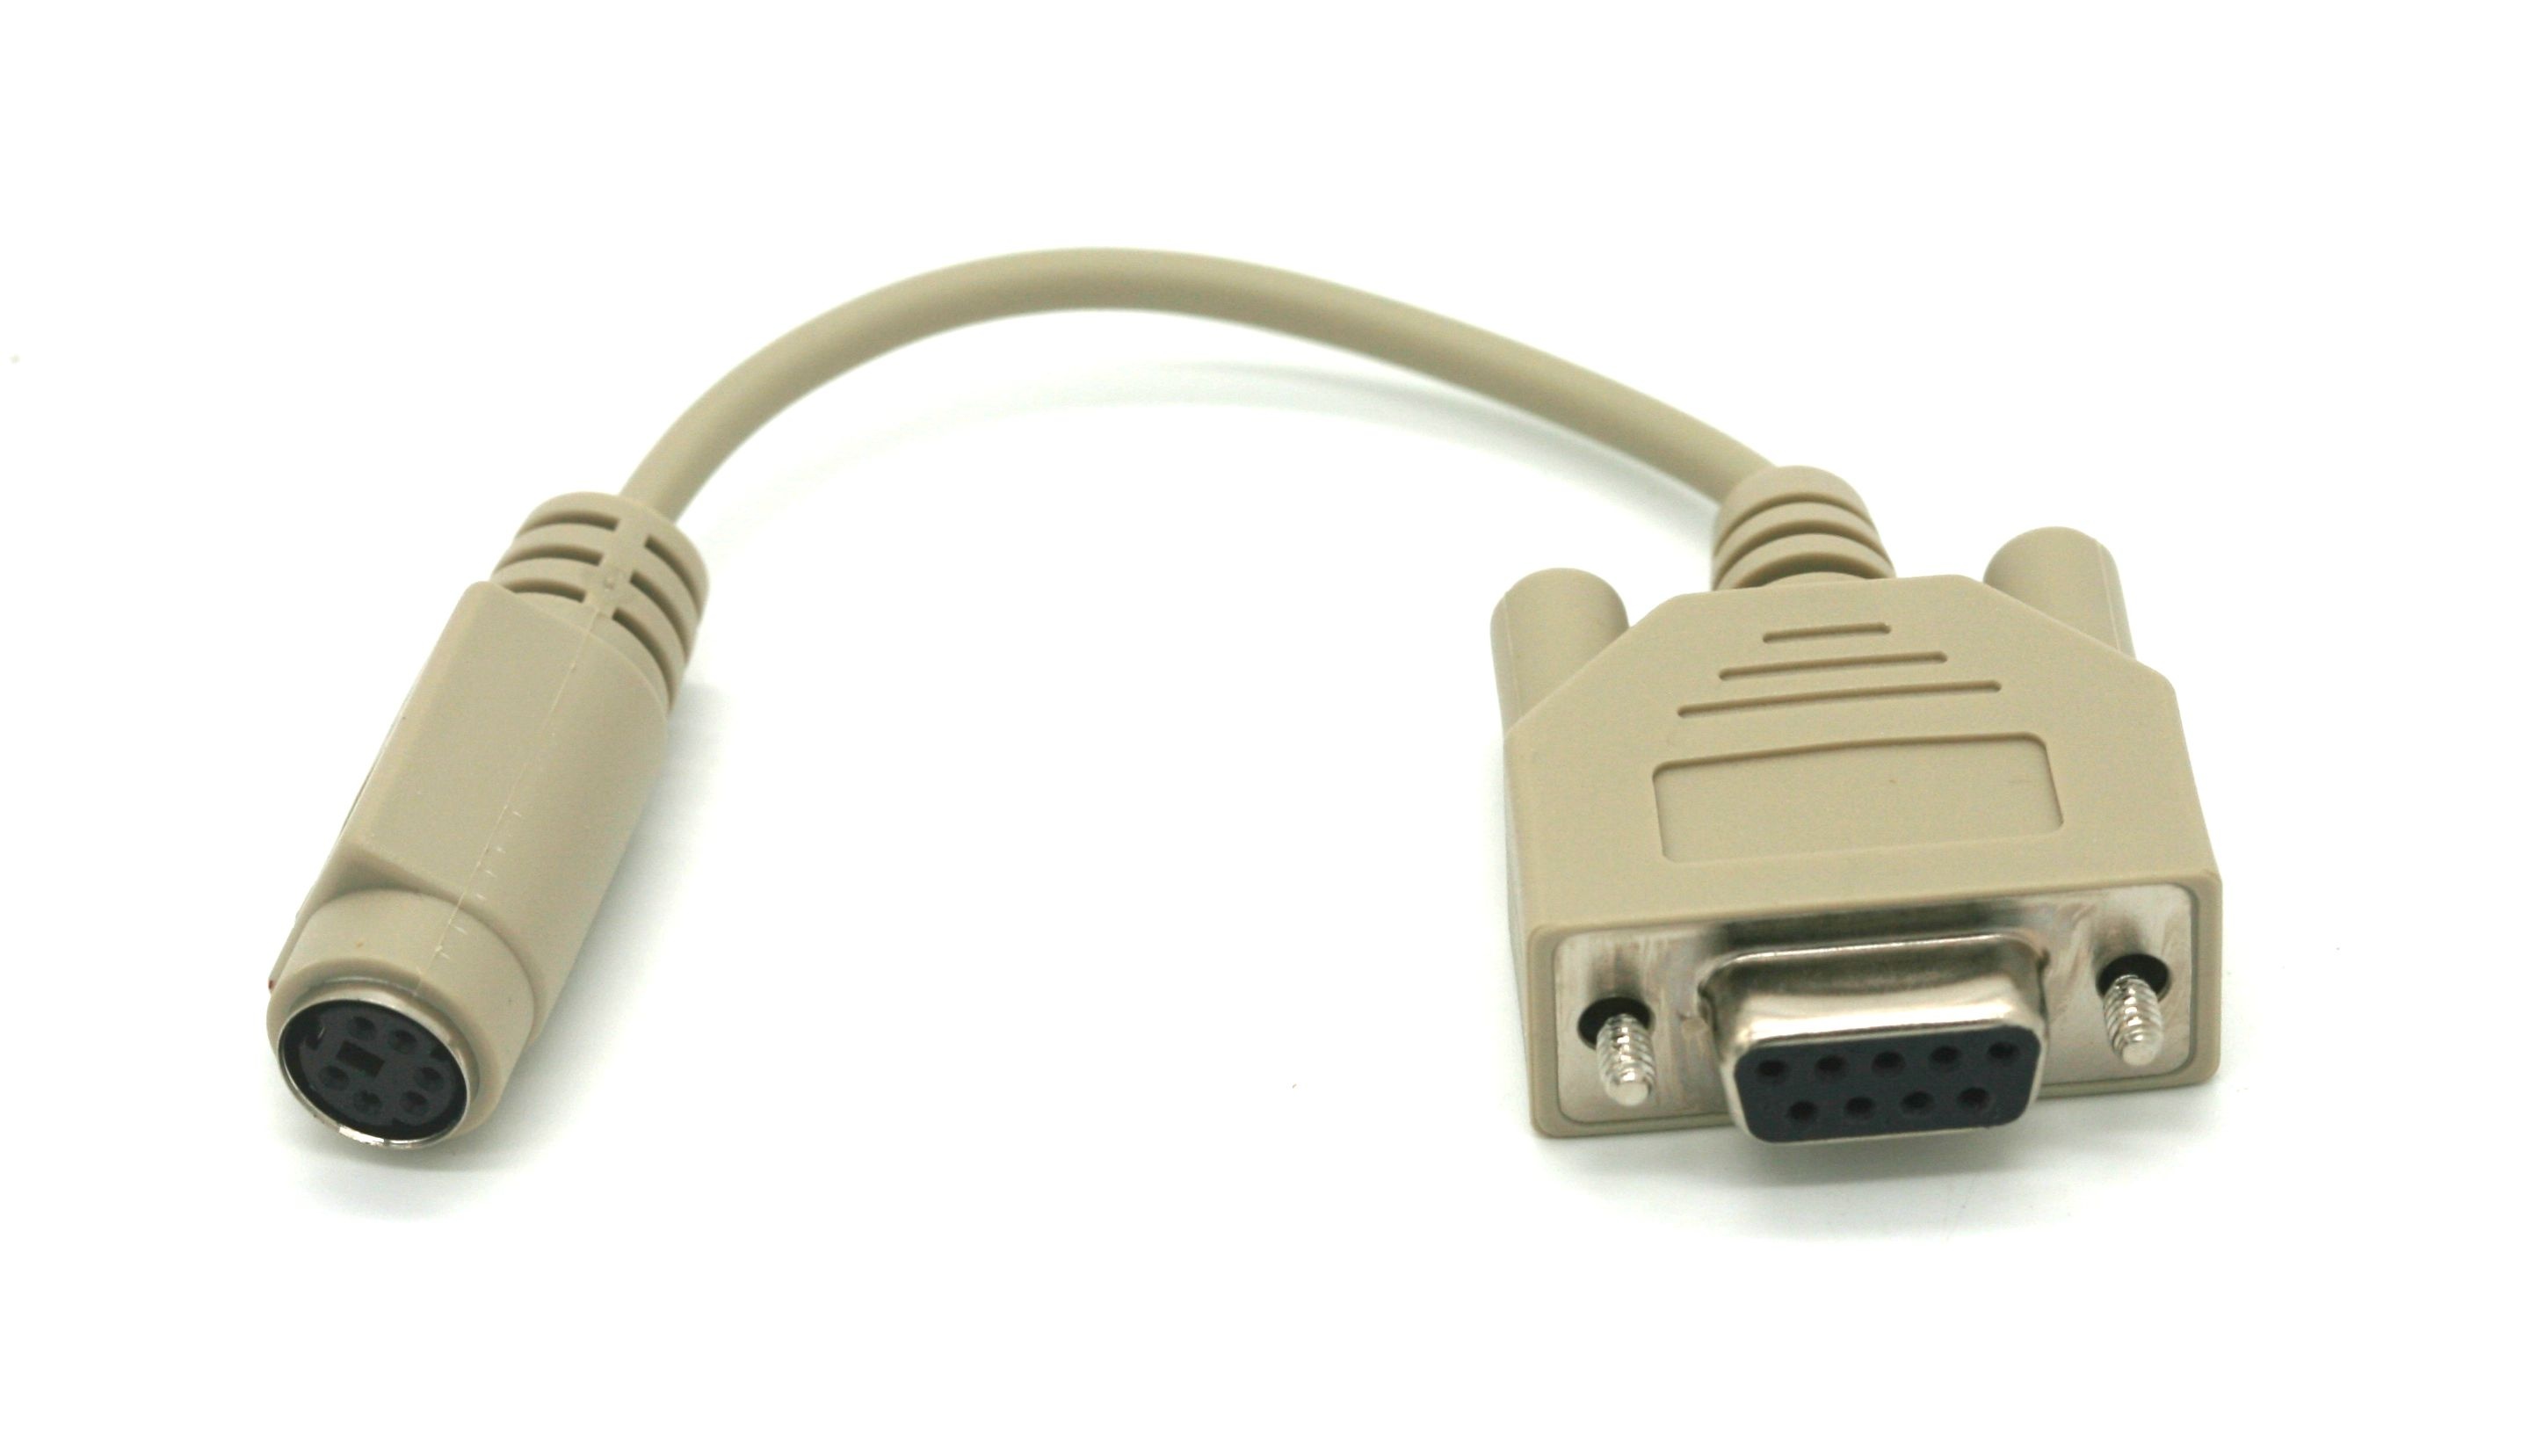 PS2-F Mouse to DB9-F Serial Port Adapter Cable 5 Inch